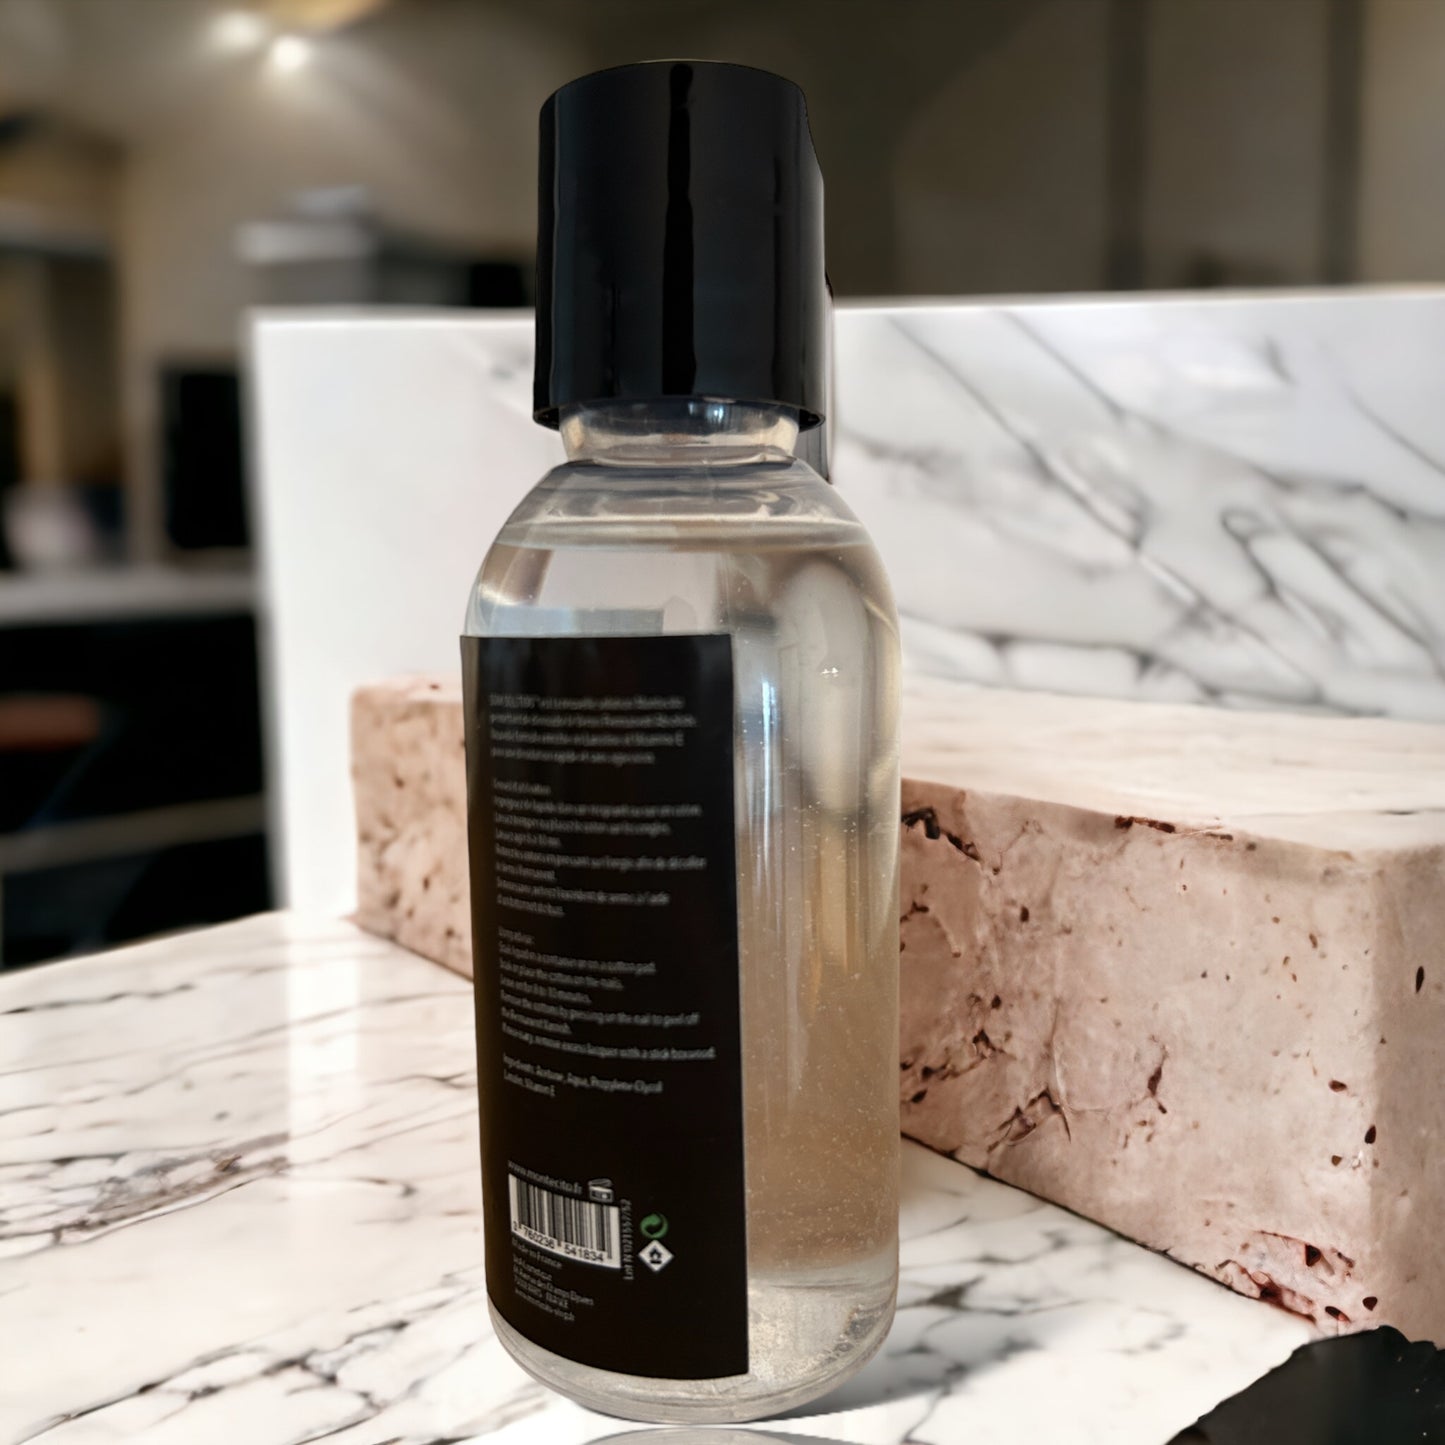 SOAK SOLUTION 100ml - Made in France